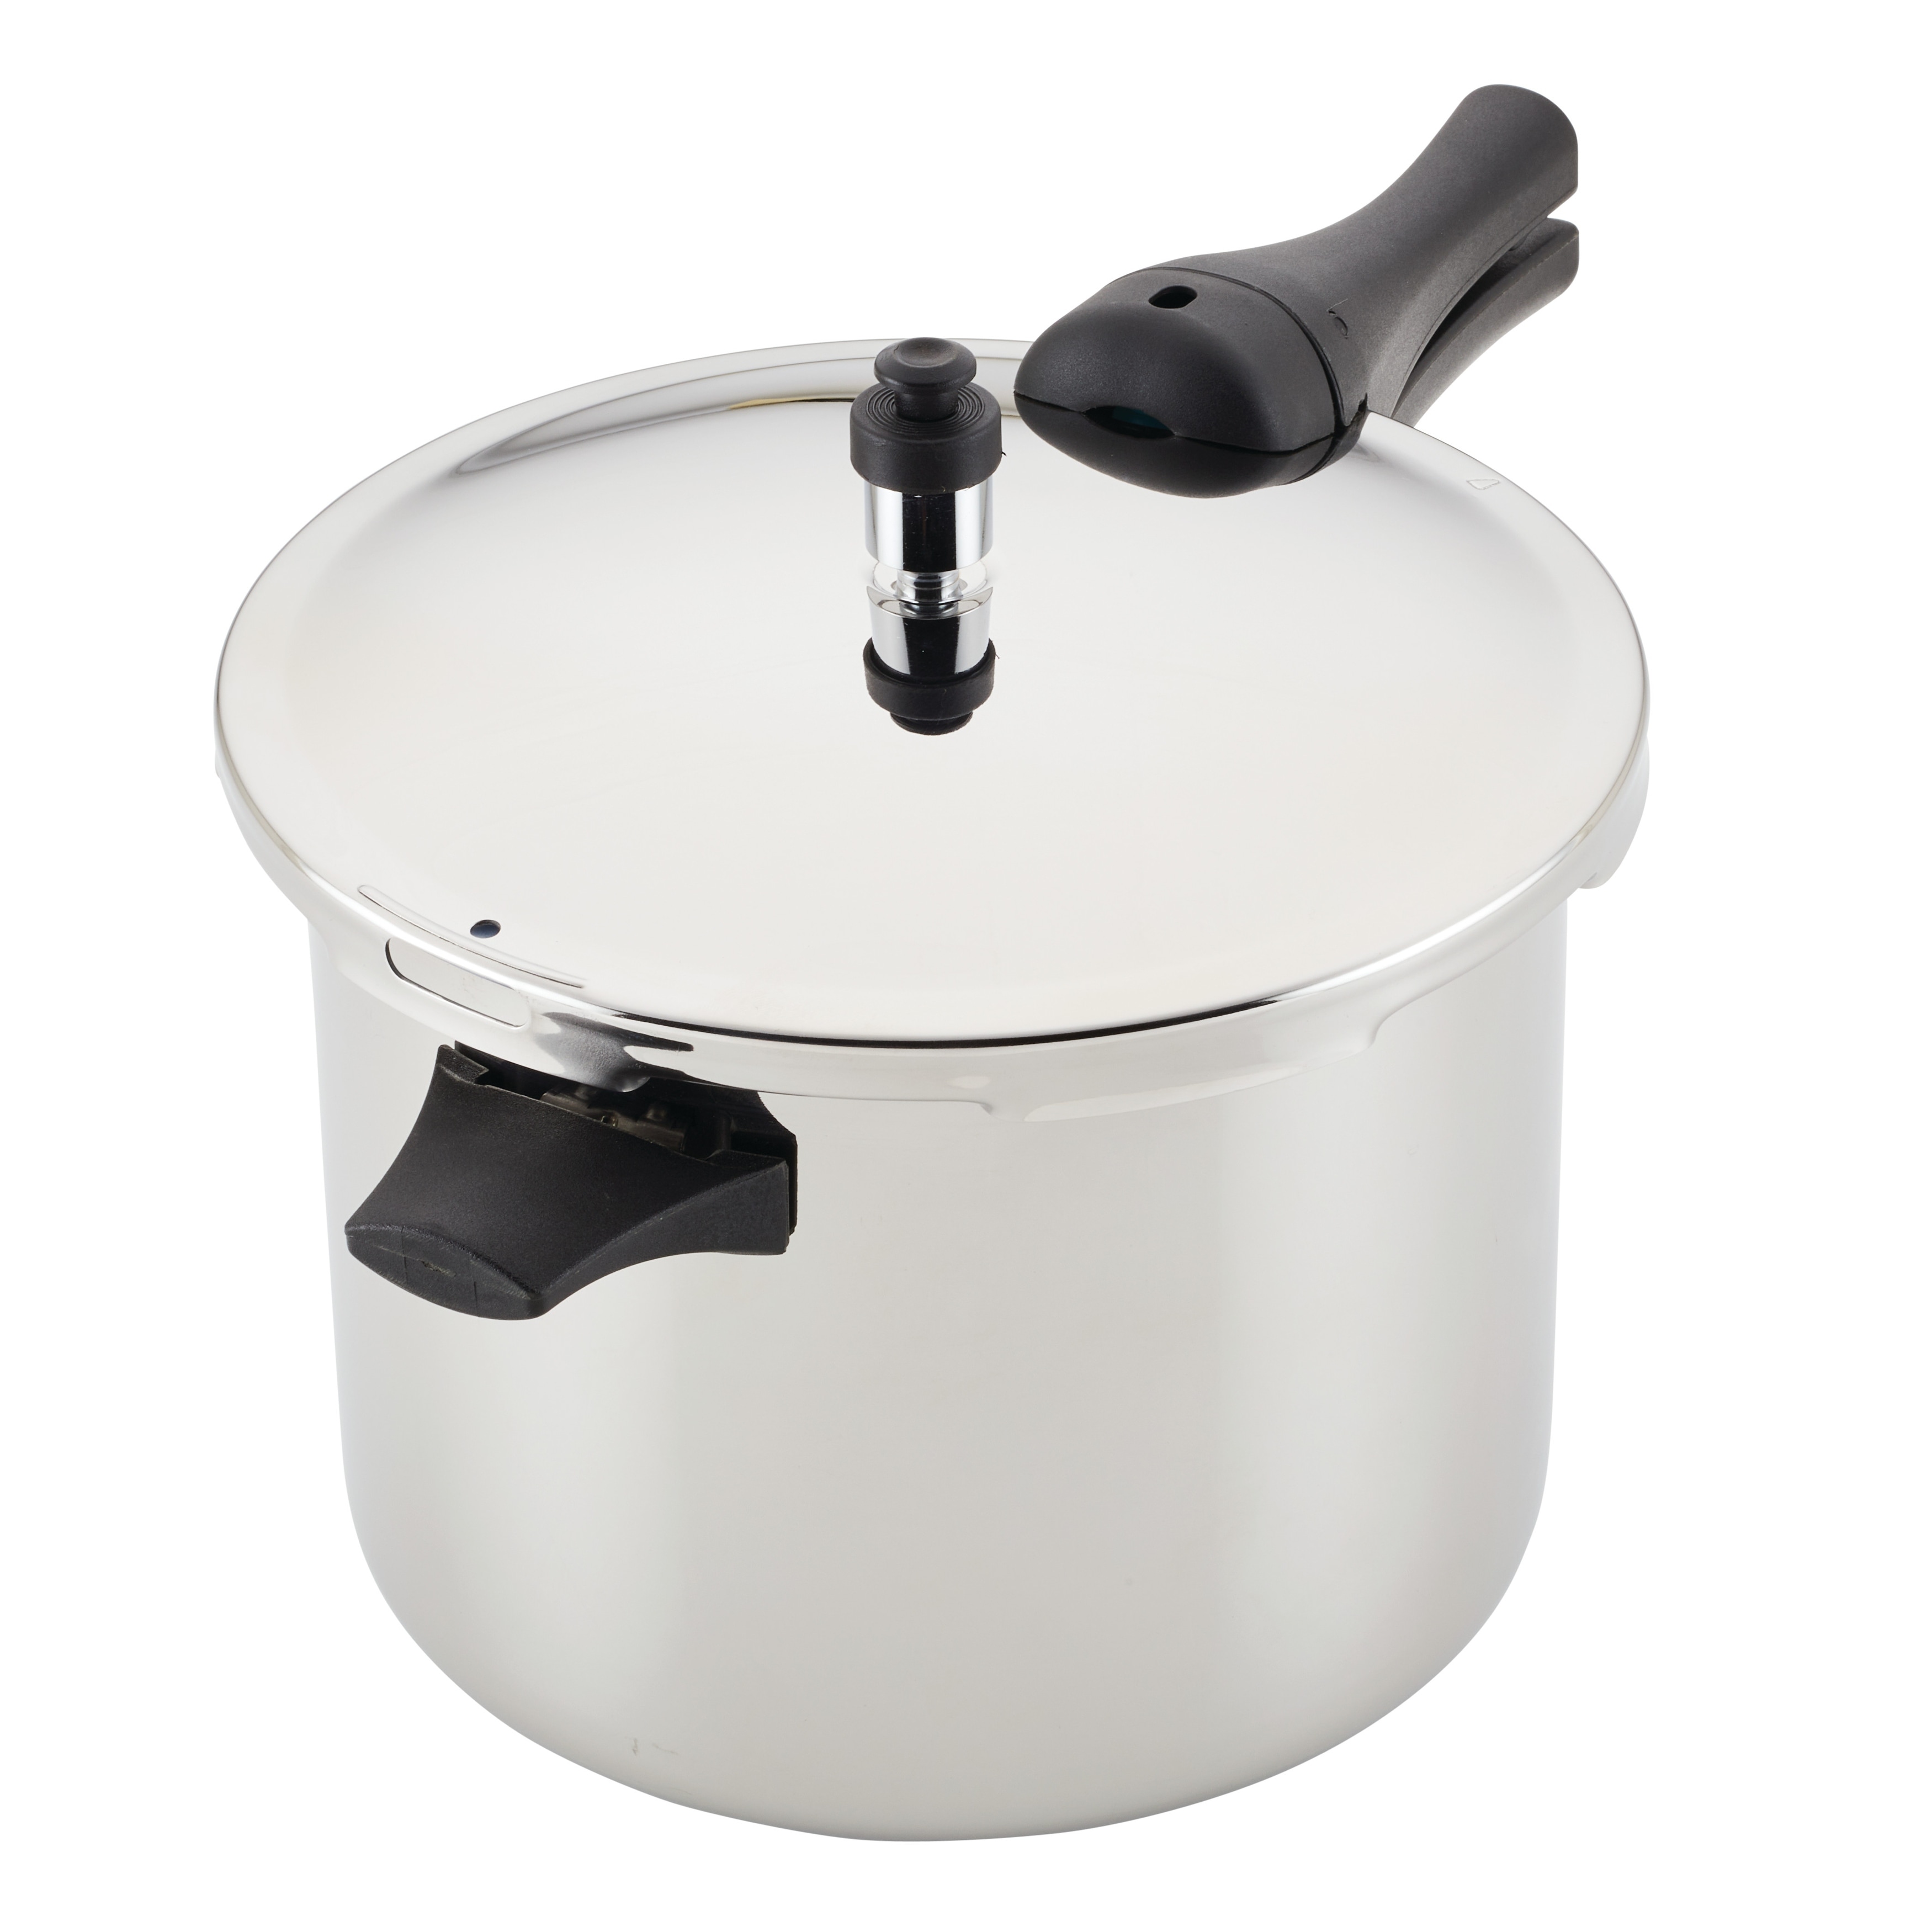 WMF Perfect Plus Pressure Cooker Stainless Steel Insert Set - Silver